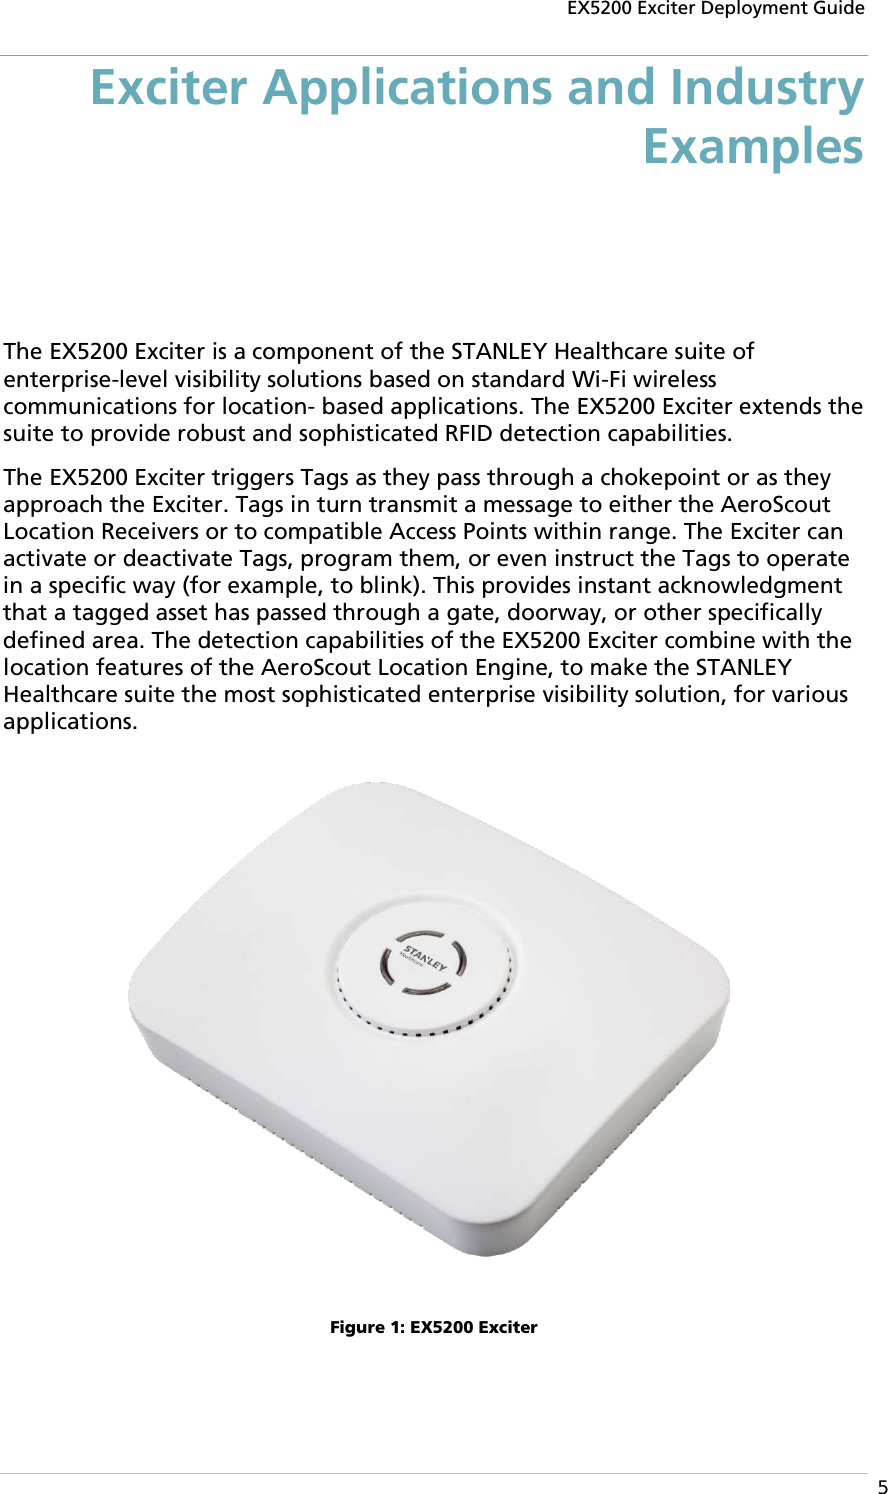 EX5200 Exciter Deployment Guide  5 Exciter Applications and Industry Examples The EX5200 Exciter is a component of the STANLEY Healthcare suite of enterprise-level visibility solutions based on standard Wi-Fi wireless communications for location- based applications. The EX5200 Exciter extends the suite to provide robust and sophisticated RFID detection capabilities. The EX5200 Exciter triggers Tags as they pass through a chokepoint or as they approach the Exciter. Tags in turn transmit a message to either the AeroScout Location Receivers or to compatible Access Points within range. The Exciter can activate or deactivate Tags, program them, or even instruct the Tags to operate in a specific way (for example, to blink). This provides instant acknowledgment that a tagged asset has passed through a gate, doorway, or other specifically defined area. The detection capabilities of the EX5200 Exciter combine with the location features of the AeroScout Location Engine, to make the STANLEY Healthcare suite the most sophisticated enterprise visibility solution, for various applications.  Figure 1: EX5200 Exciter 